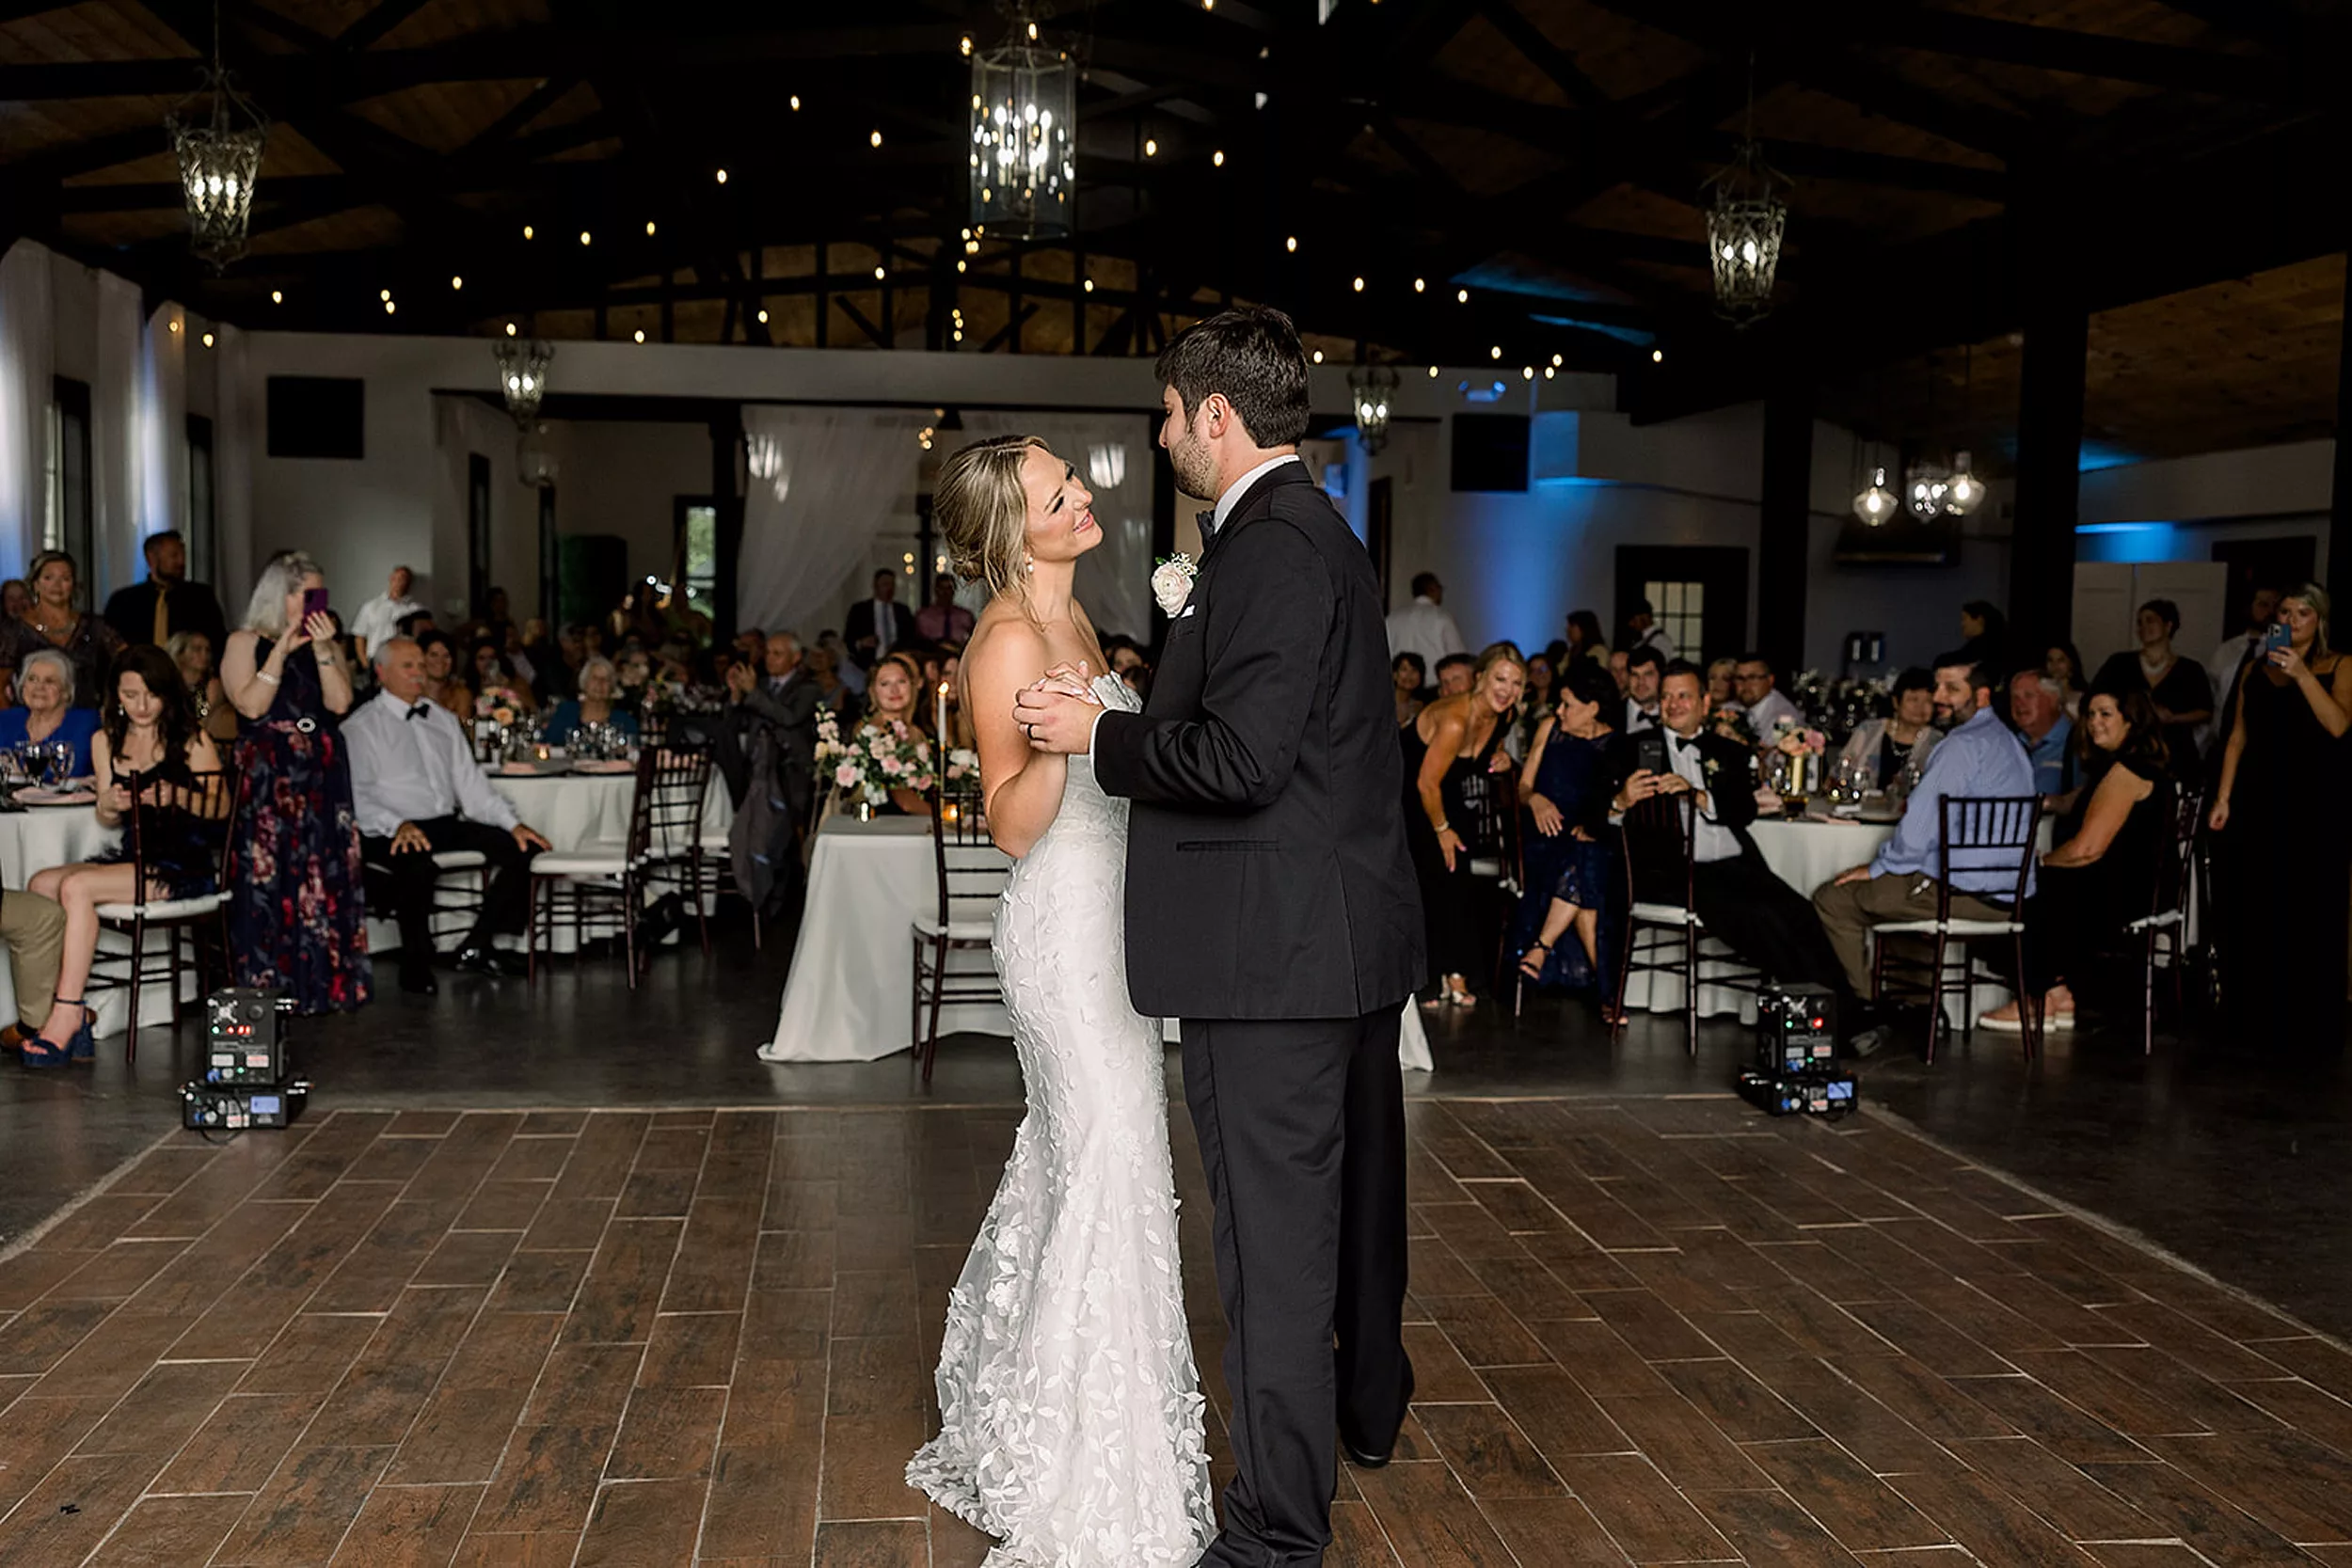 Newlyweds dance together alone for the first time at their White Oaks Vineyard reception while their guests look on from their seats